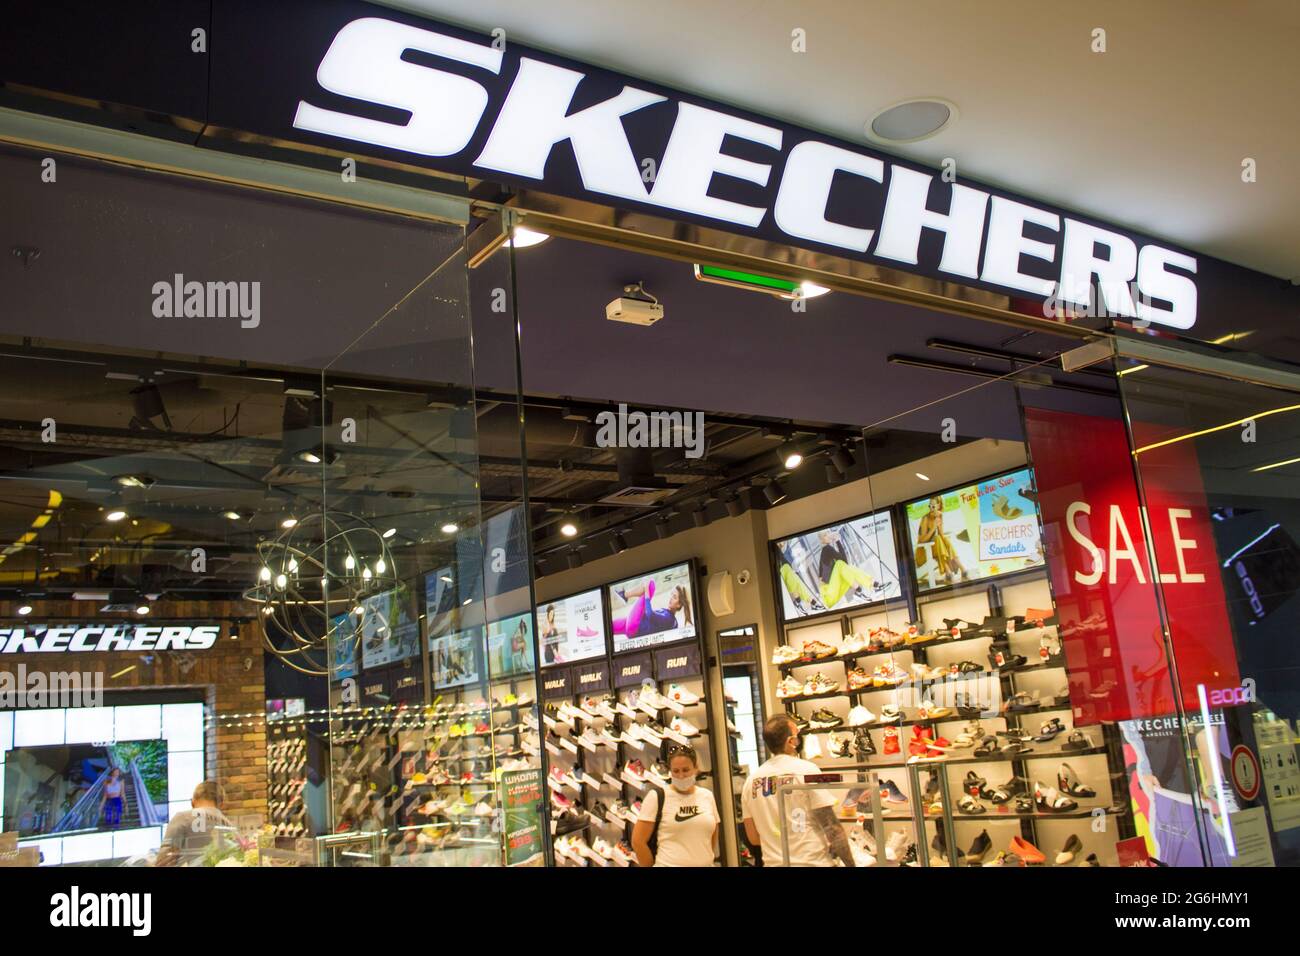 Skechers American Based Retail Shoe Store Shop Front Footwear Brand Sign  Inside Intu Lakeside Shopping Centre Mall West Thurrock Essex England UK  Stock Photo Alamy | ophirah.nl